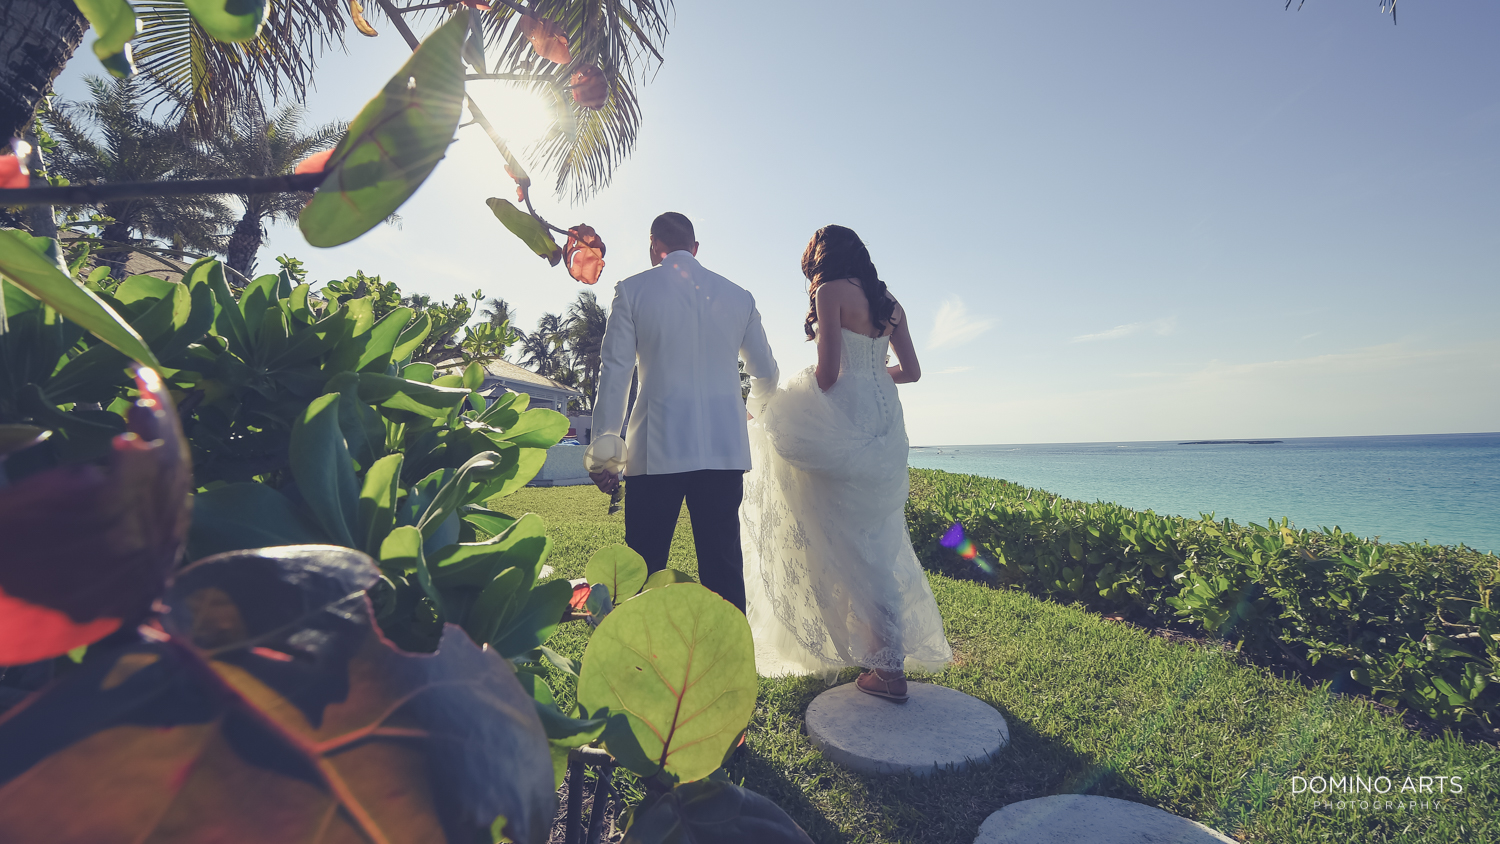 Artistic wedding picture of bride and groom at One&Only Ocean Club Bahamas